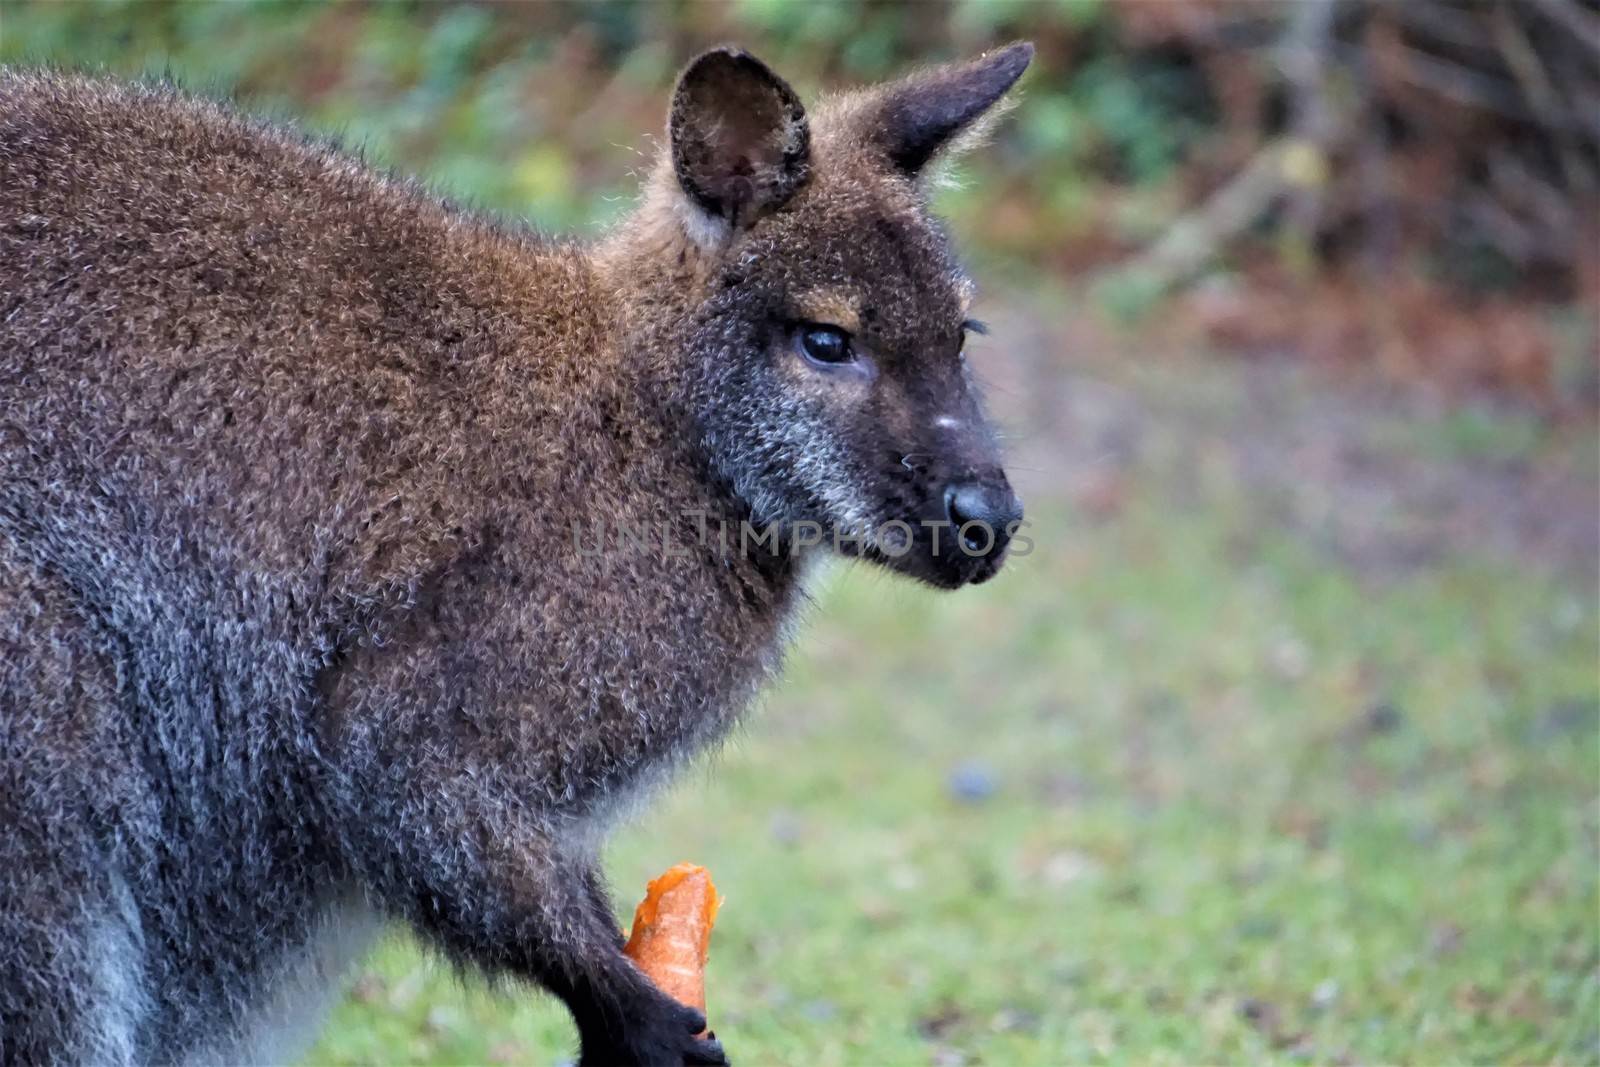 A cute red-necked wallaby eating a carrot